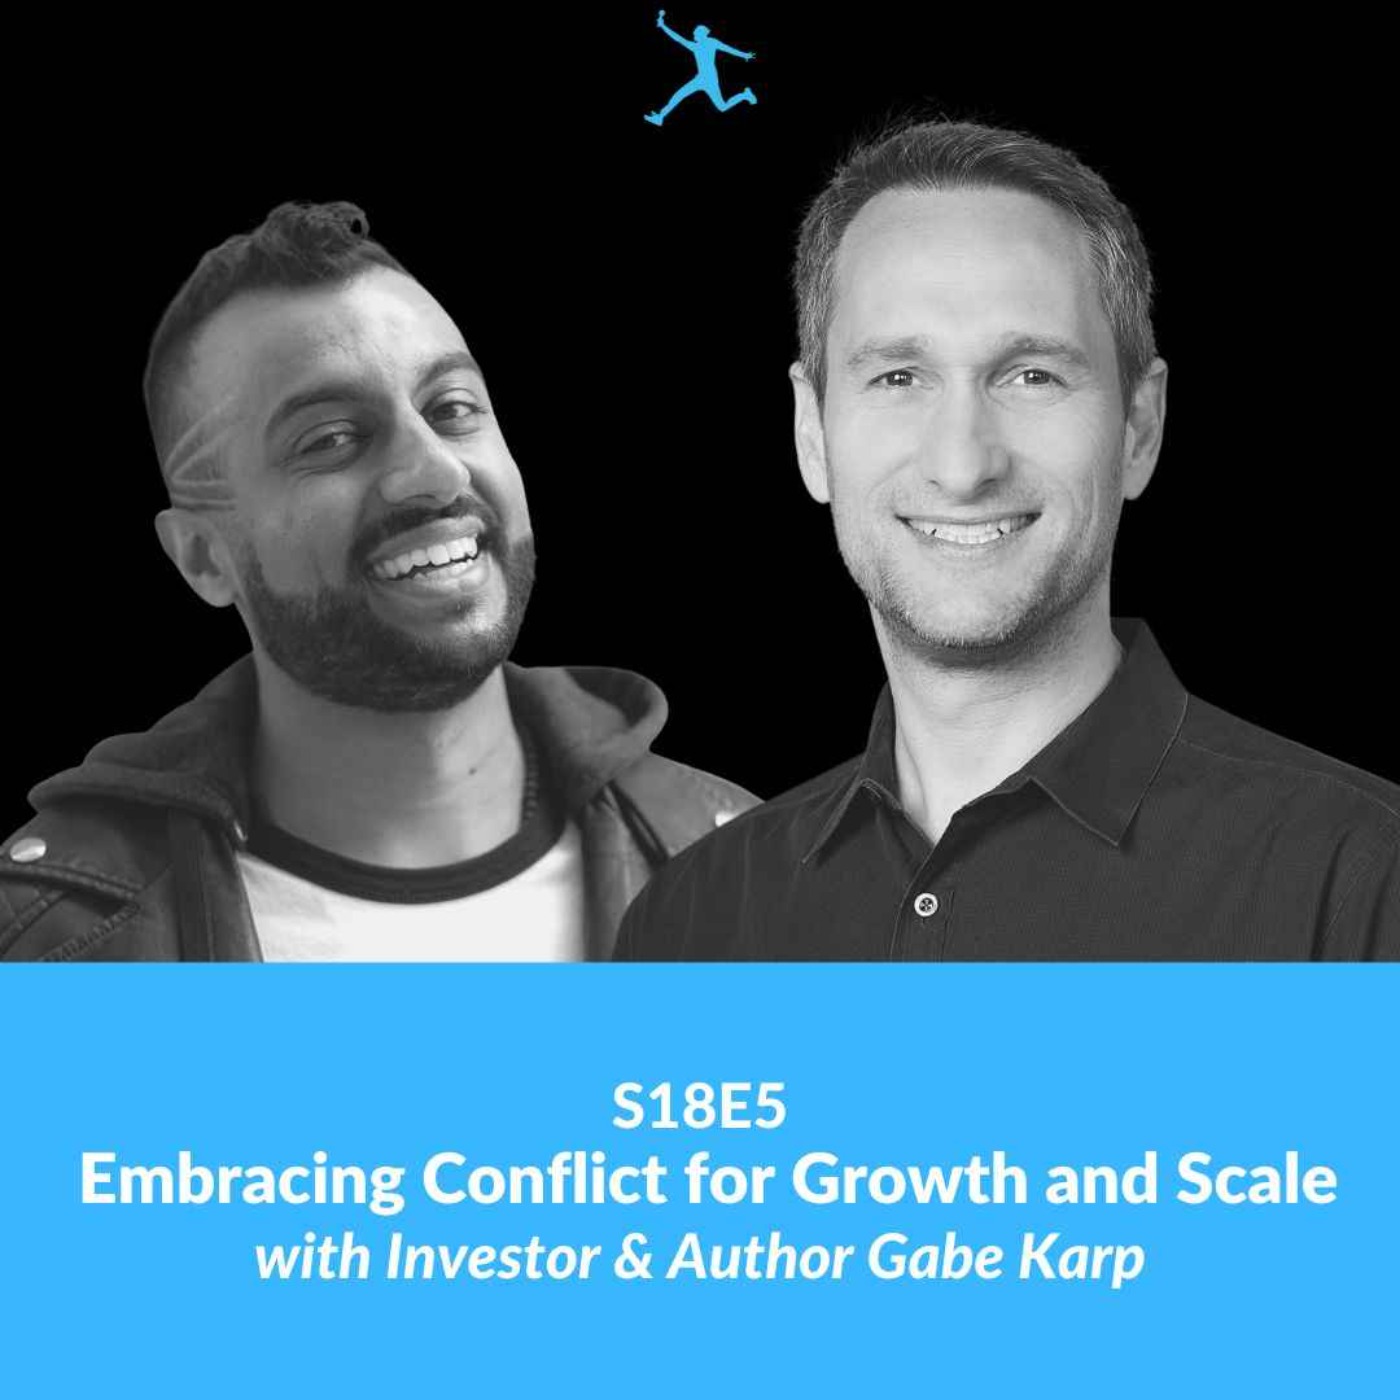 S18E5: Embracing Conflict for Growth and Scale with Investor & Author Gabe Karp